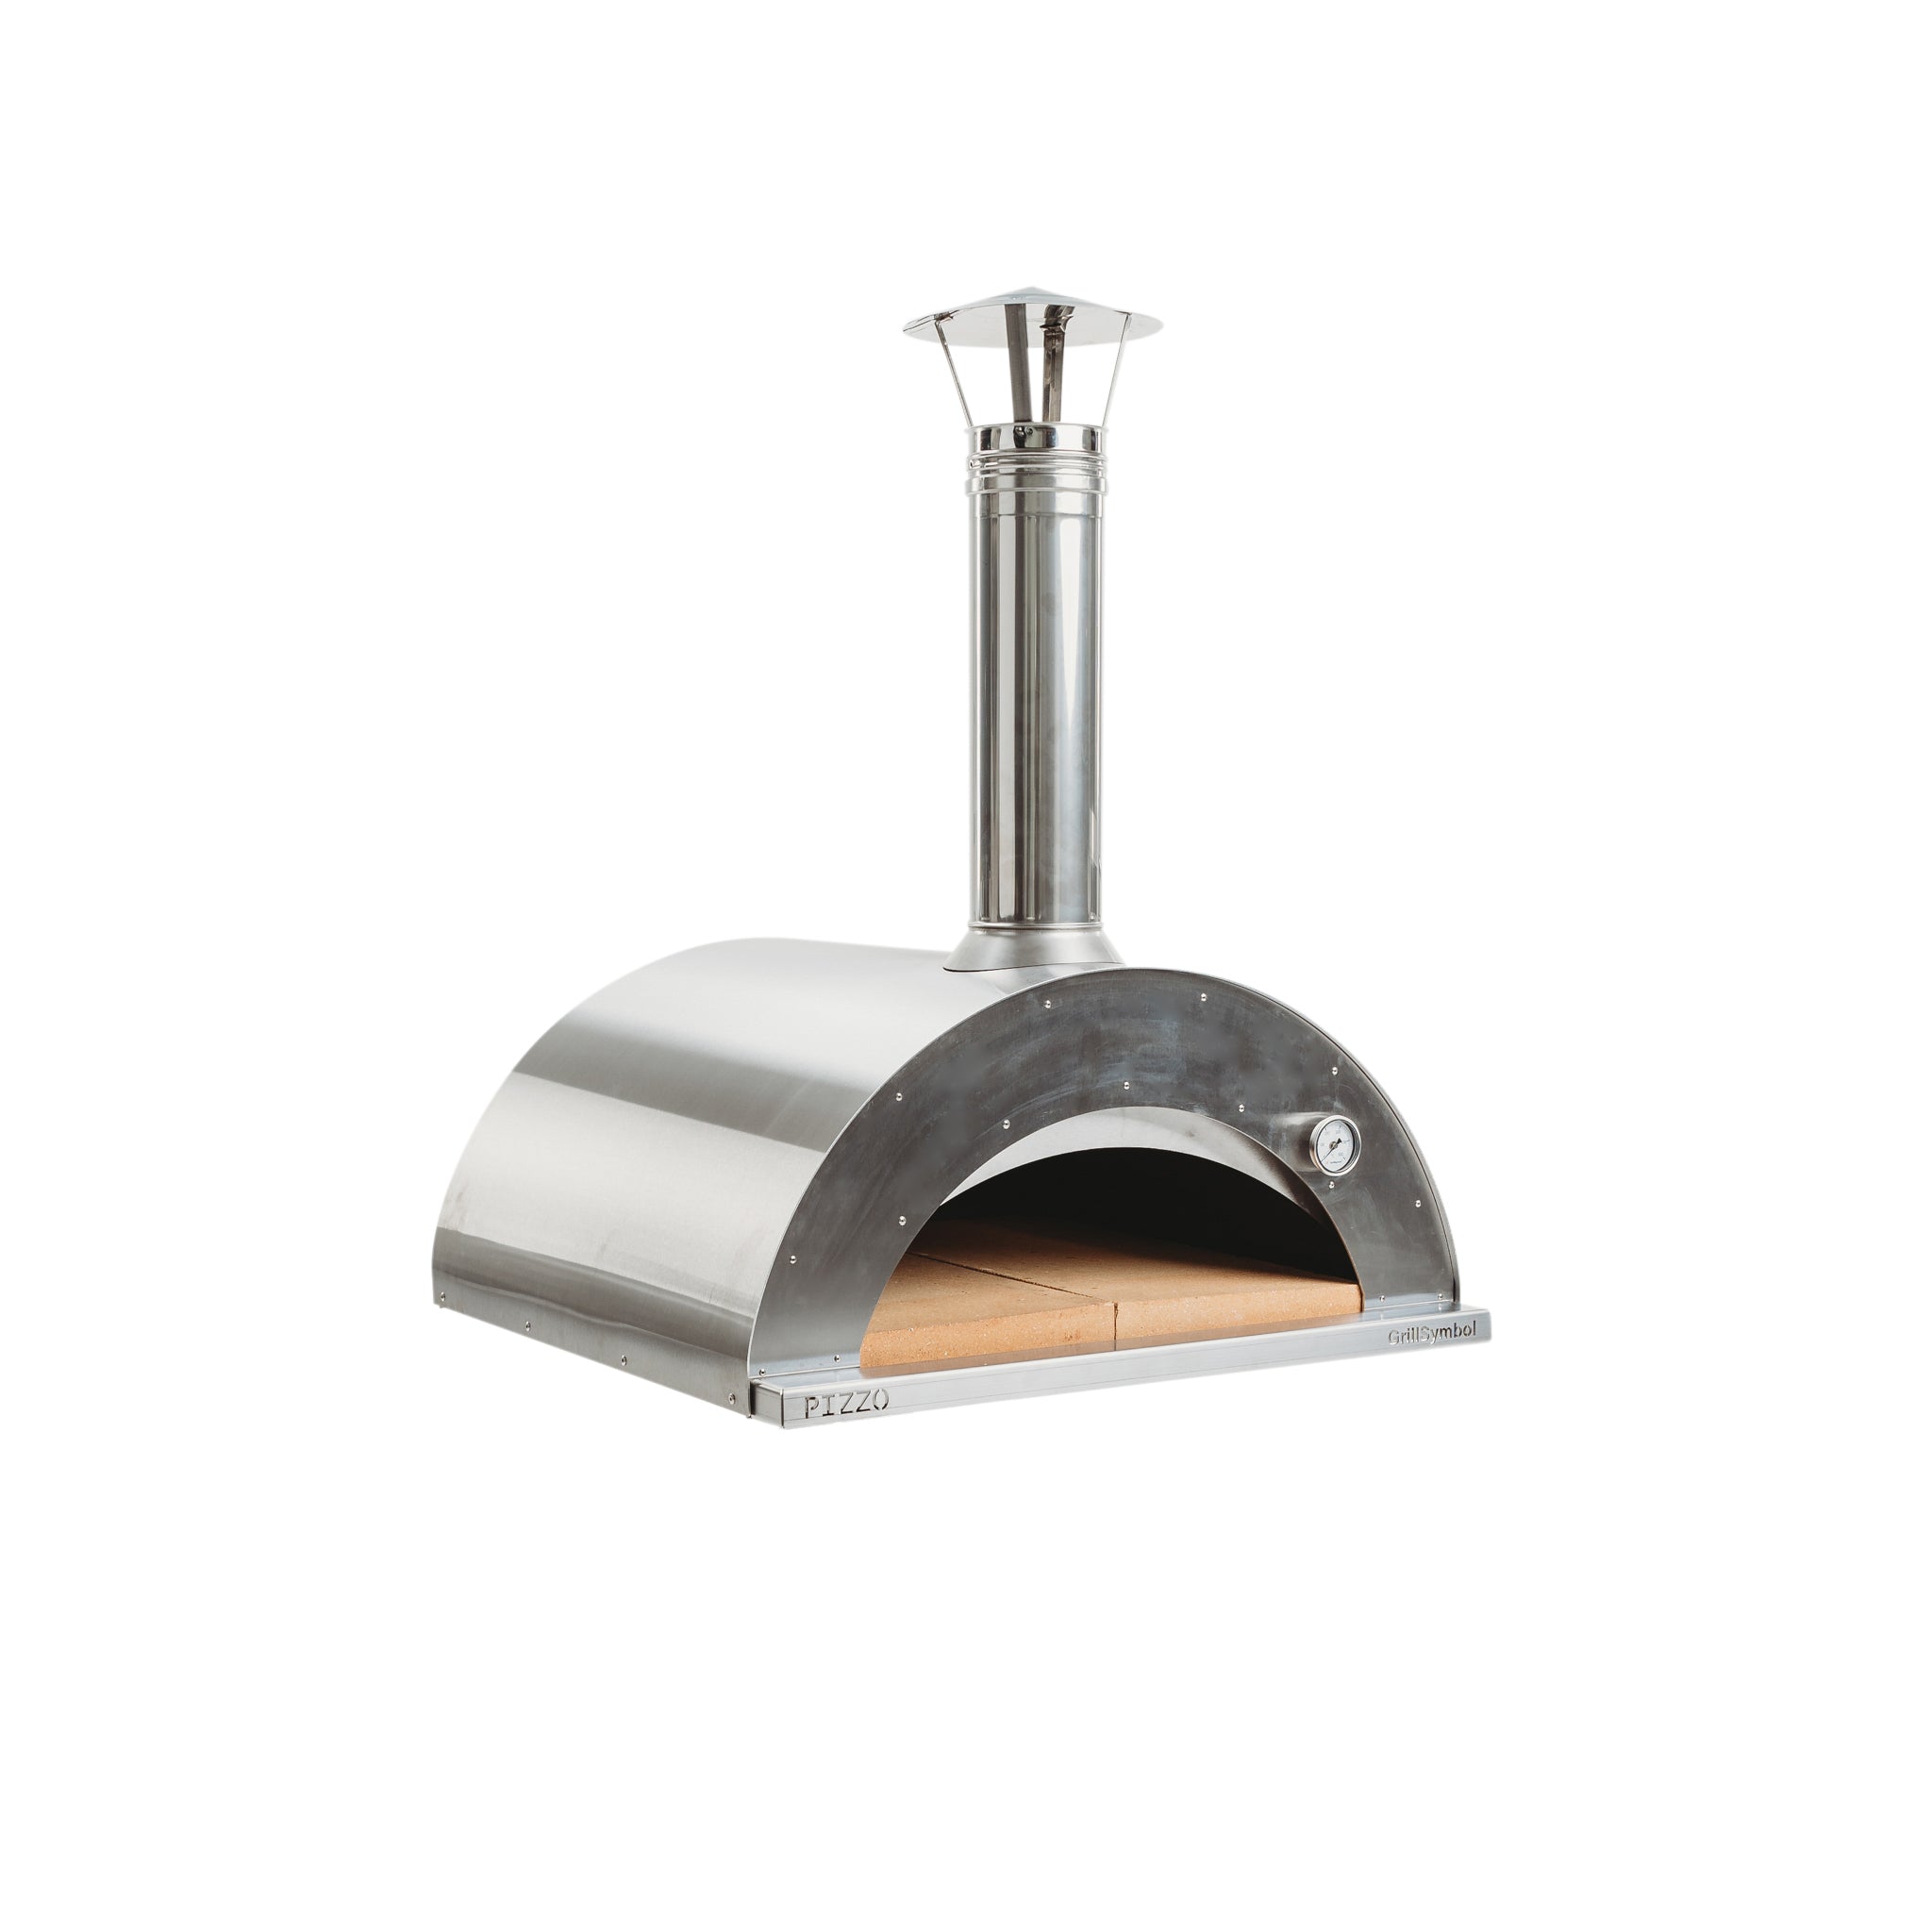 GrillSymbol stainless steel Wood Fired Pizza Oven Pizzo-inox